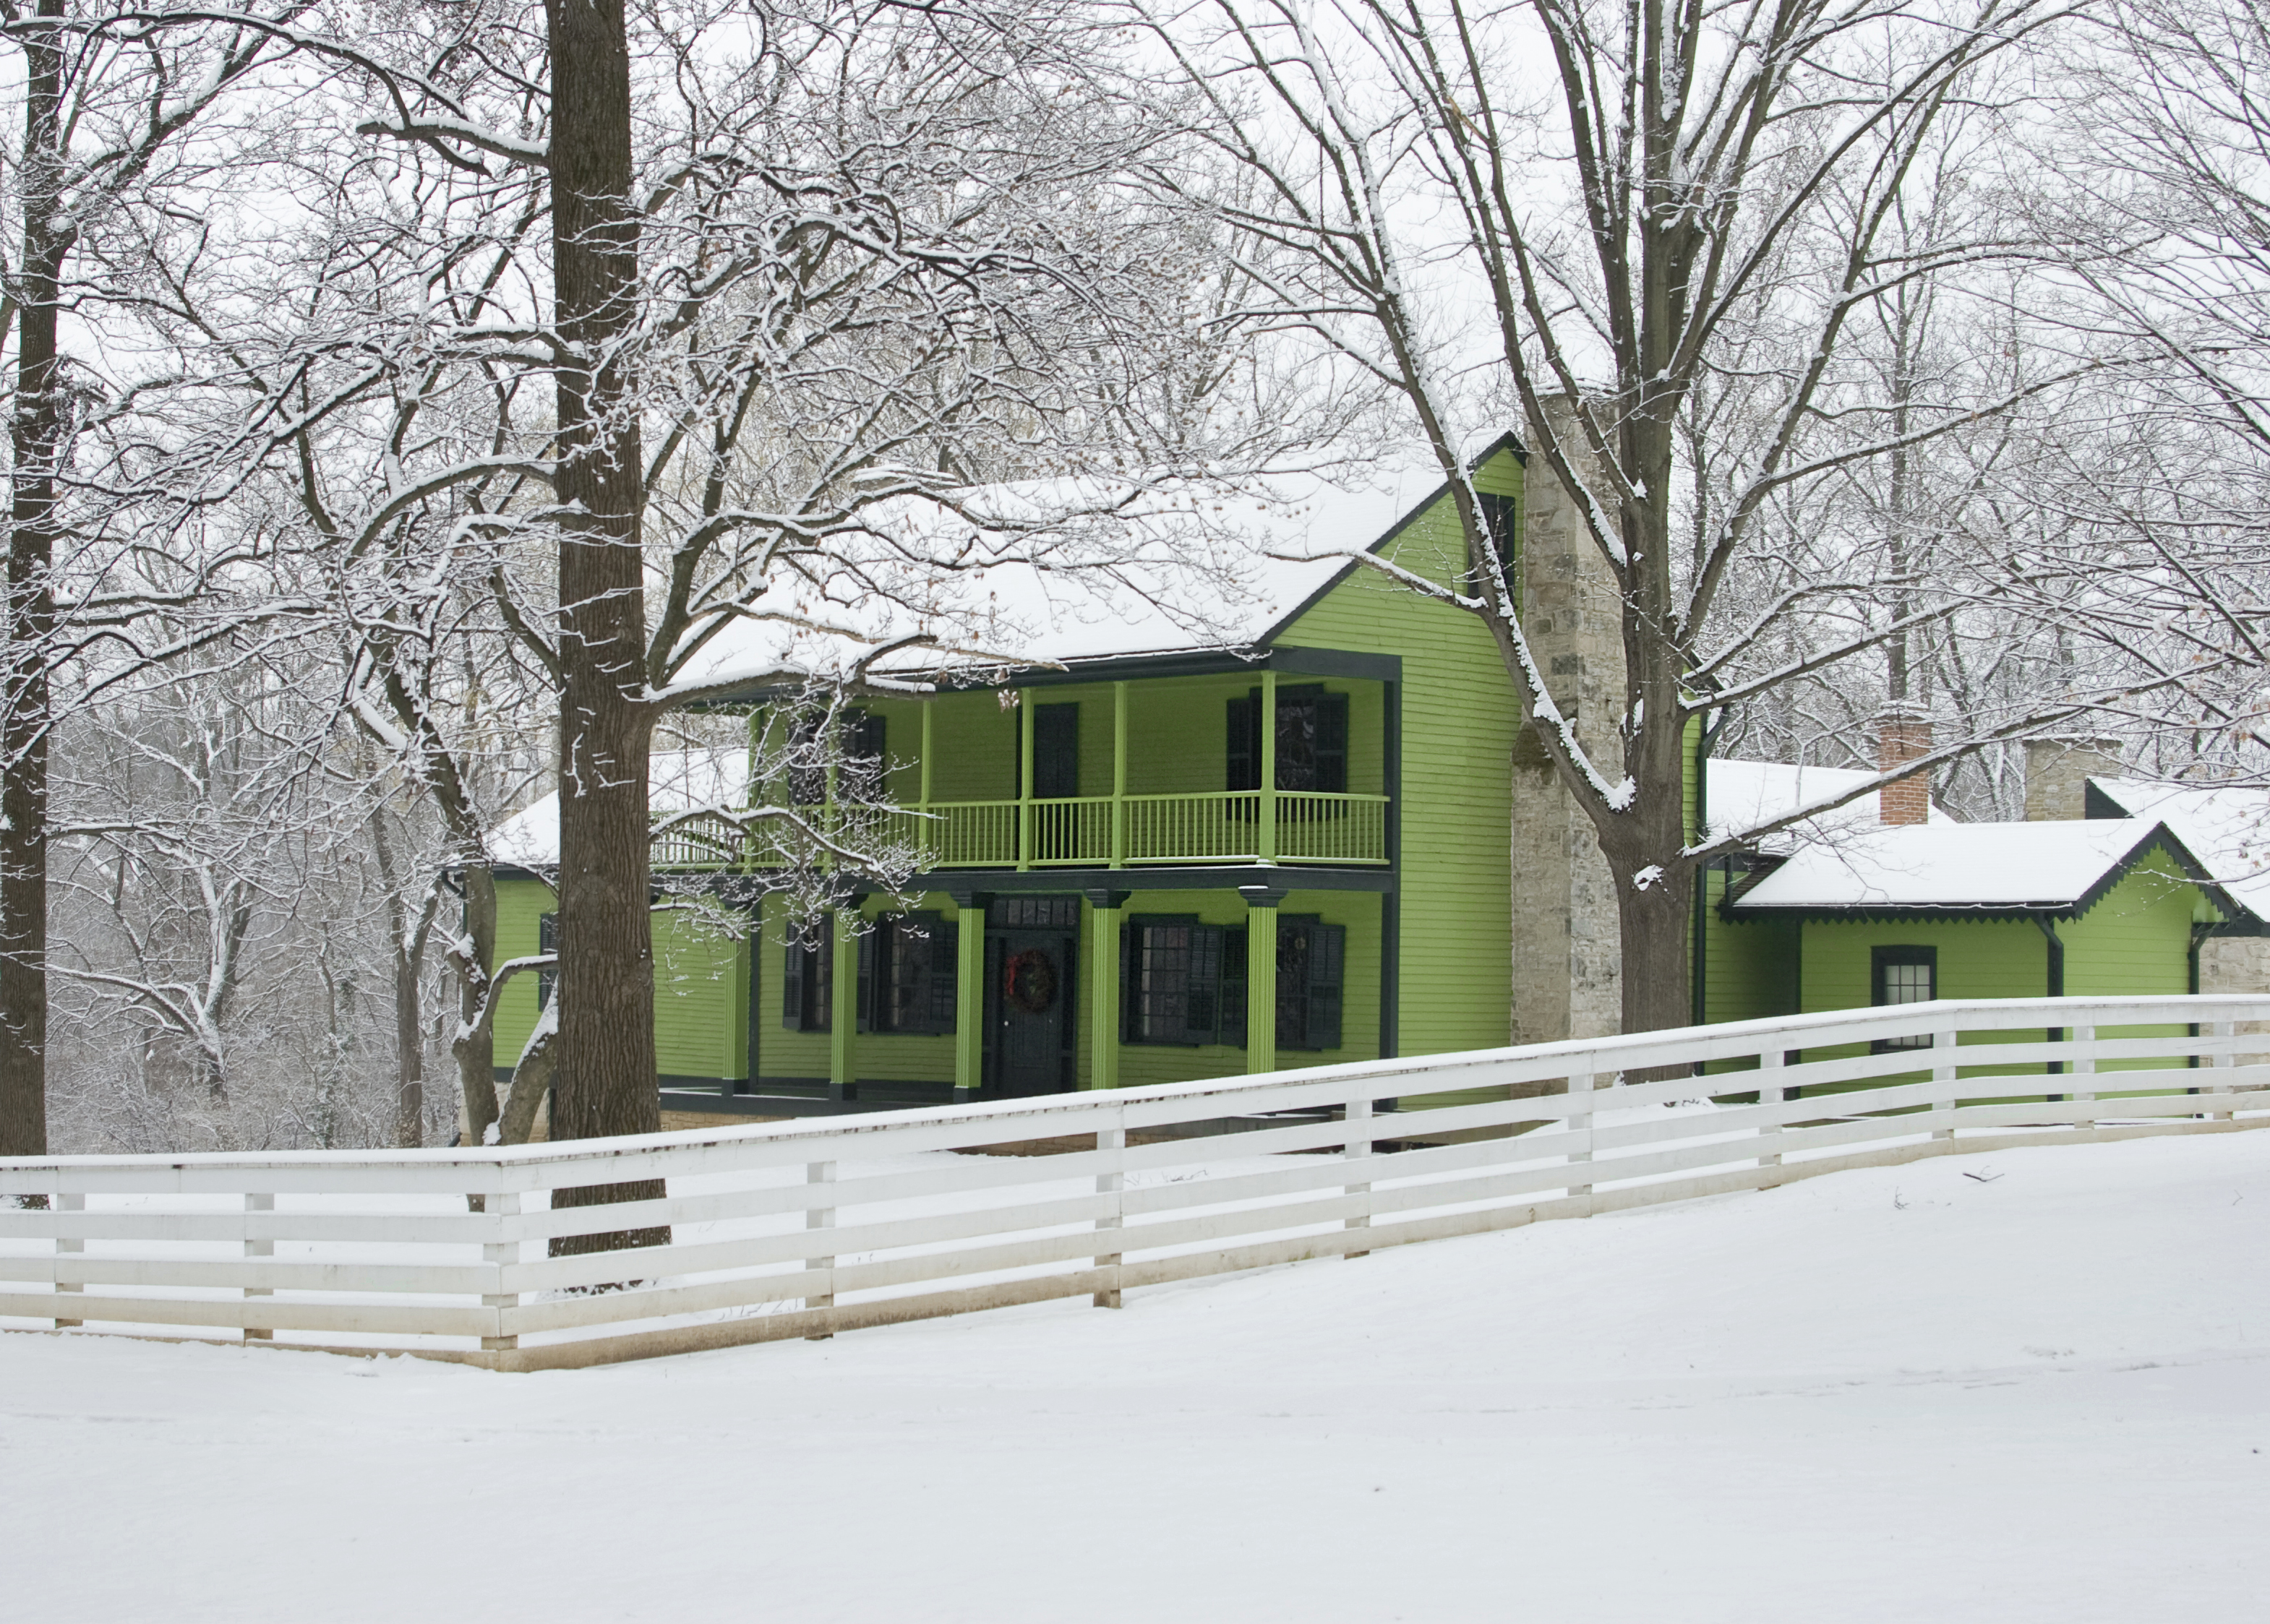 Historic green house with snow on ground